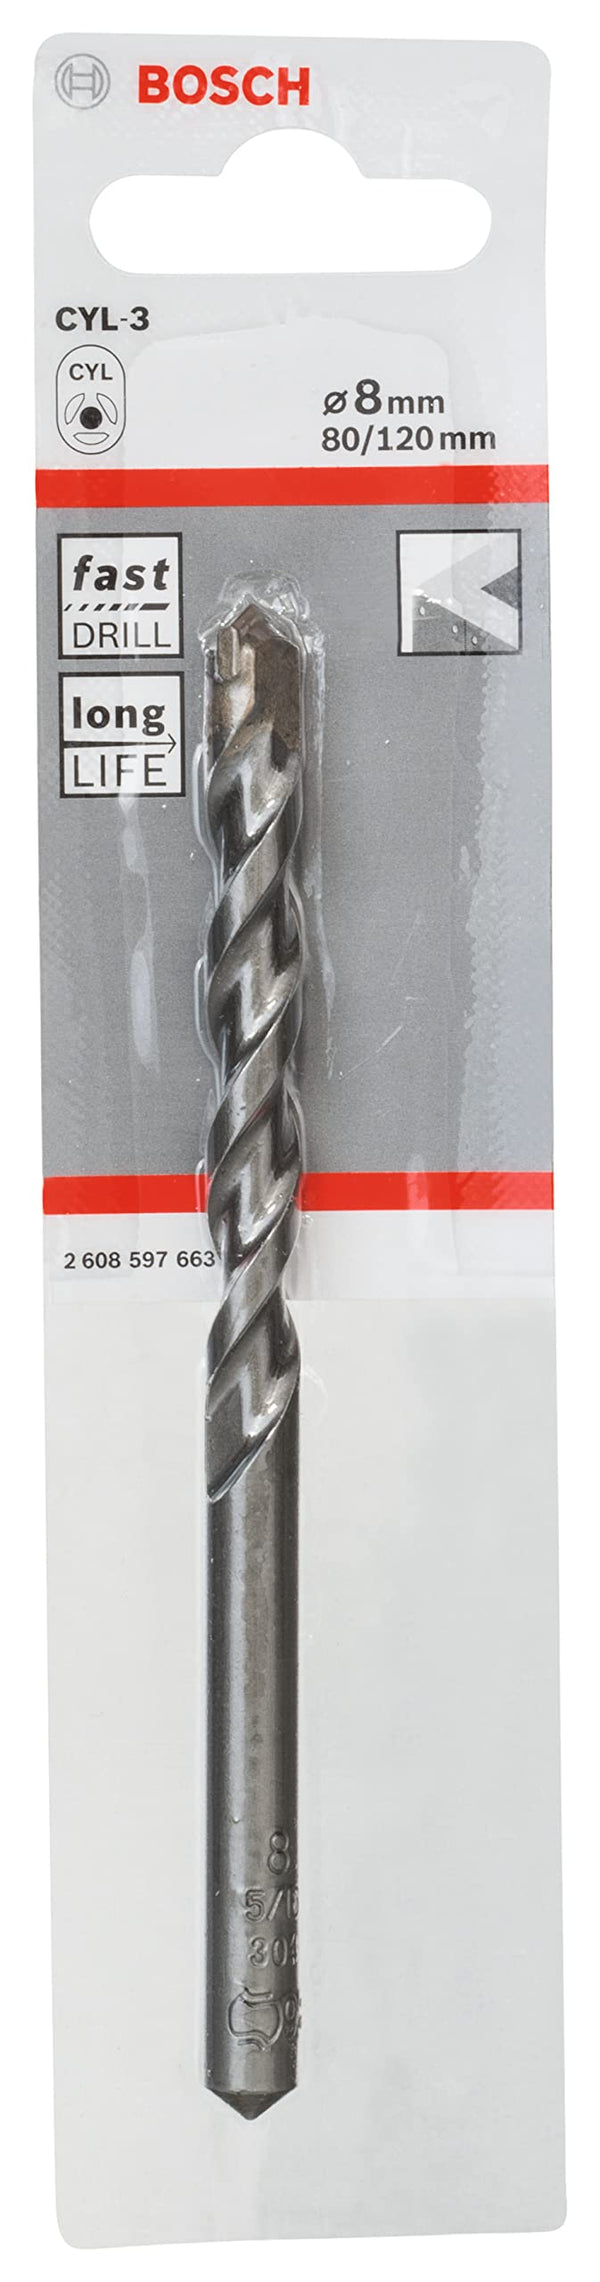 Bosch CYL-3 DRILL BIT FOR ROTARY DRILLS/DRIVERS, FOR IMPACT DRILL/DRIVERS 8 MM 2608597663